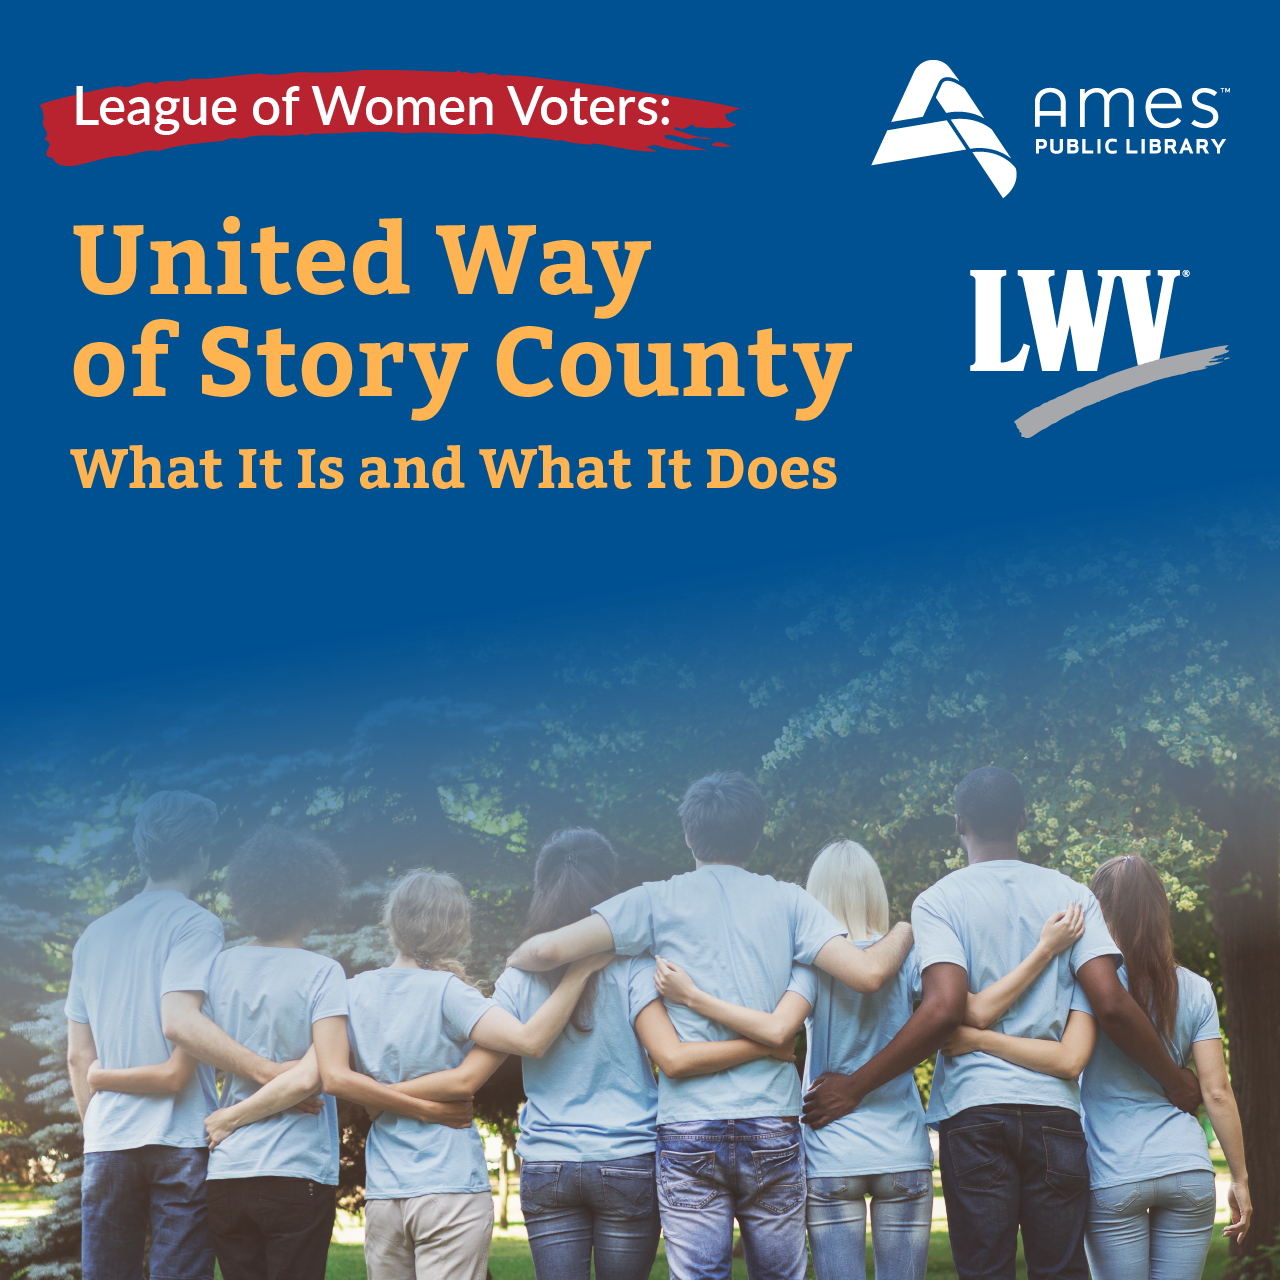 League of Women Voters: United Way of Story County - What It Is and What It Does